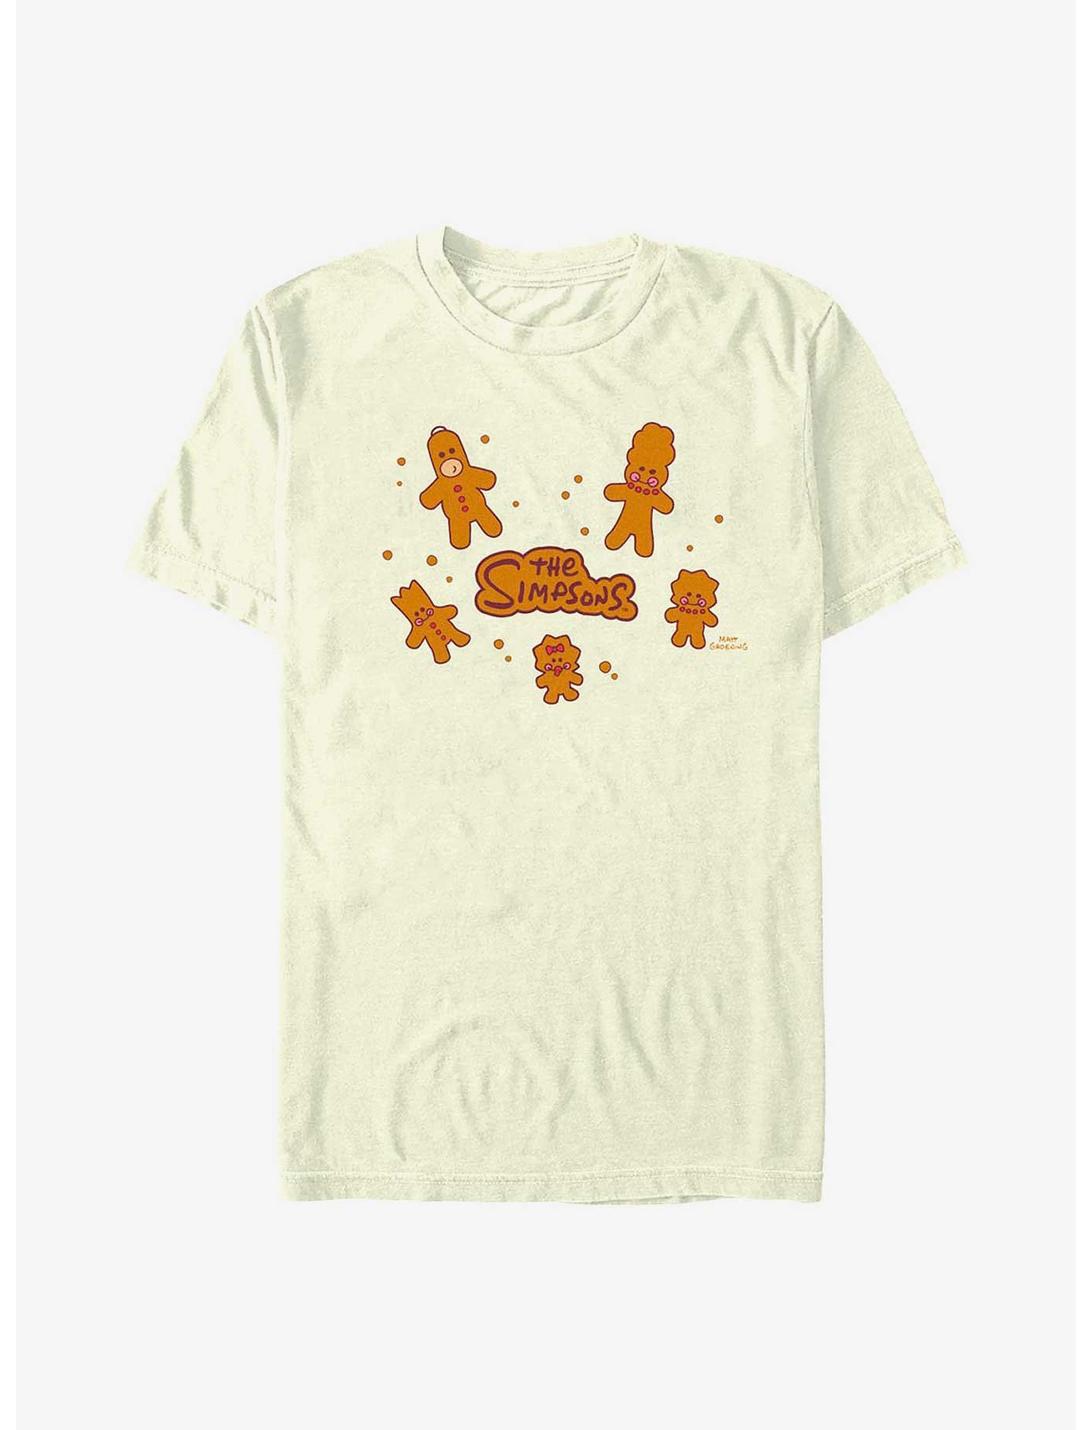 The Simpsons Gingerbread Family T-Shirt, NATURAL, hi-res